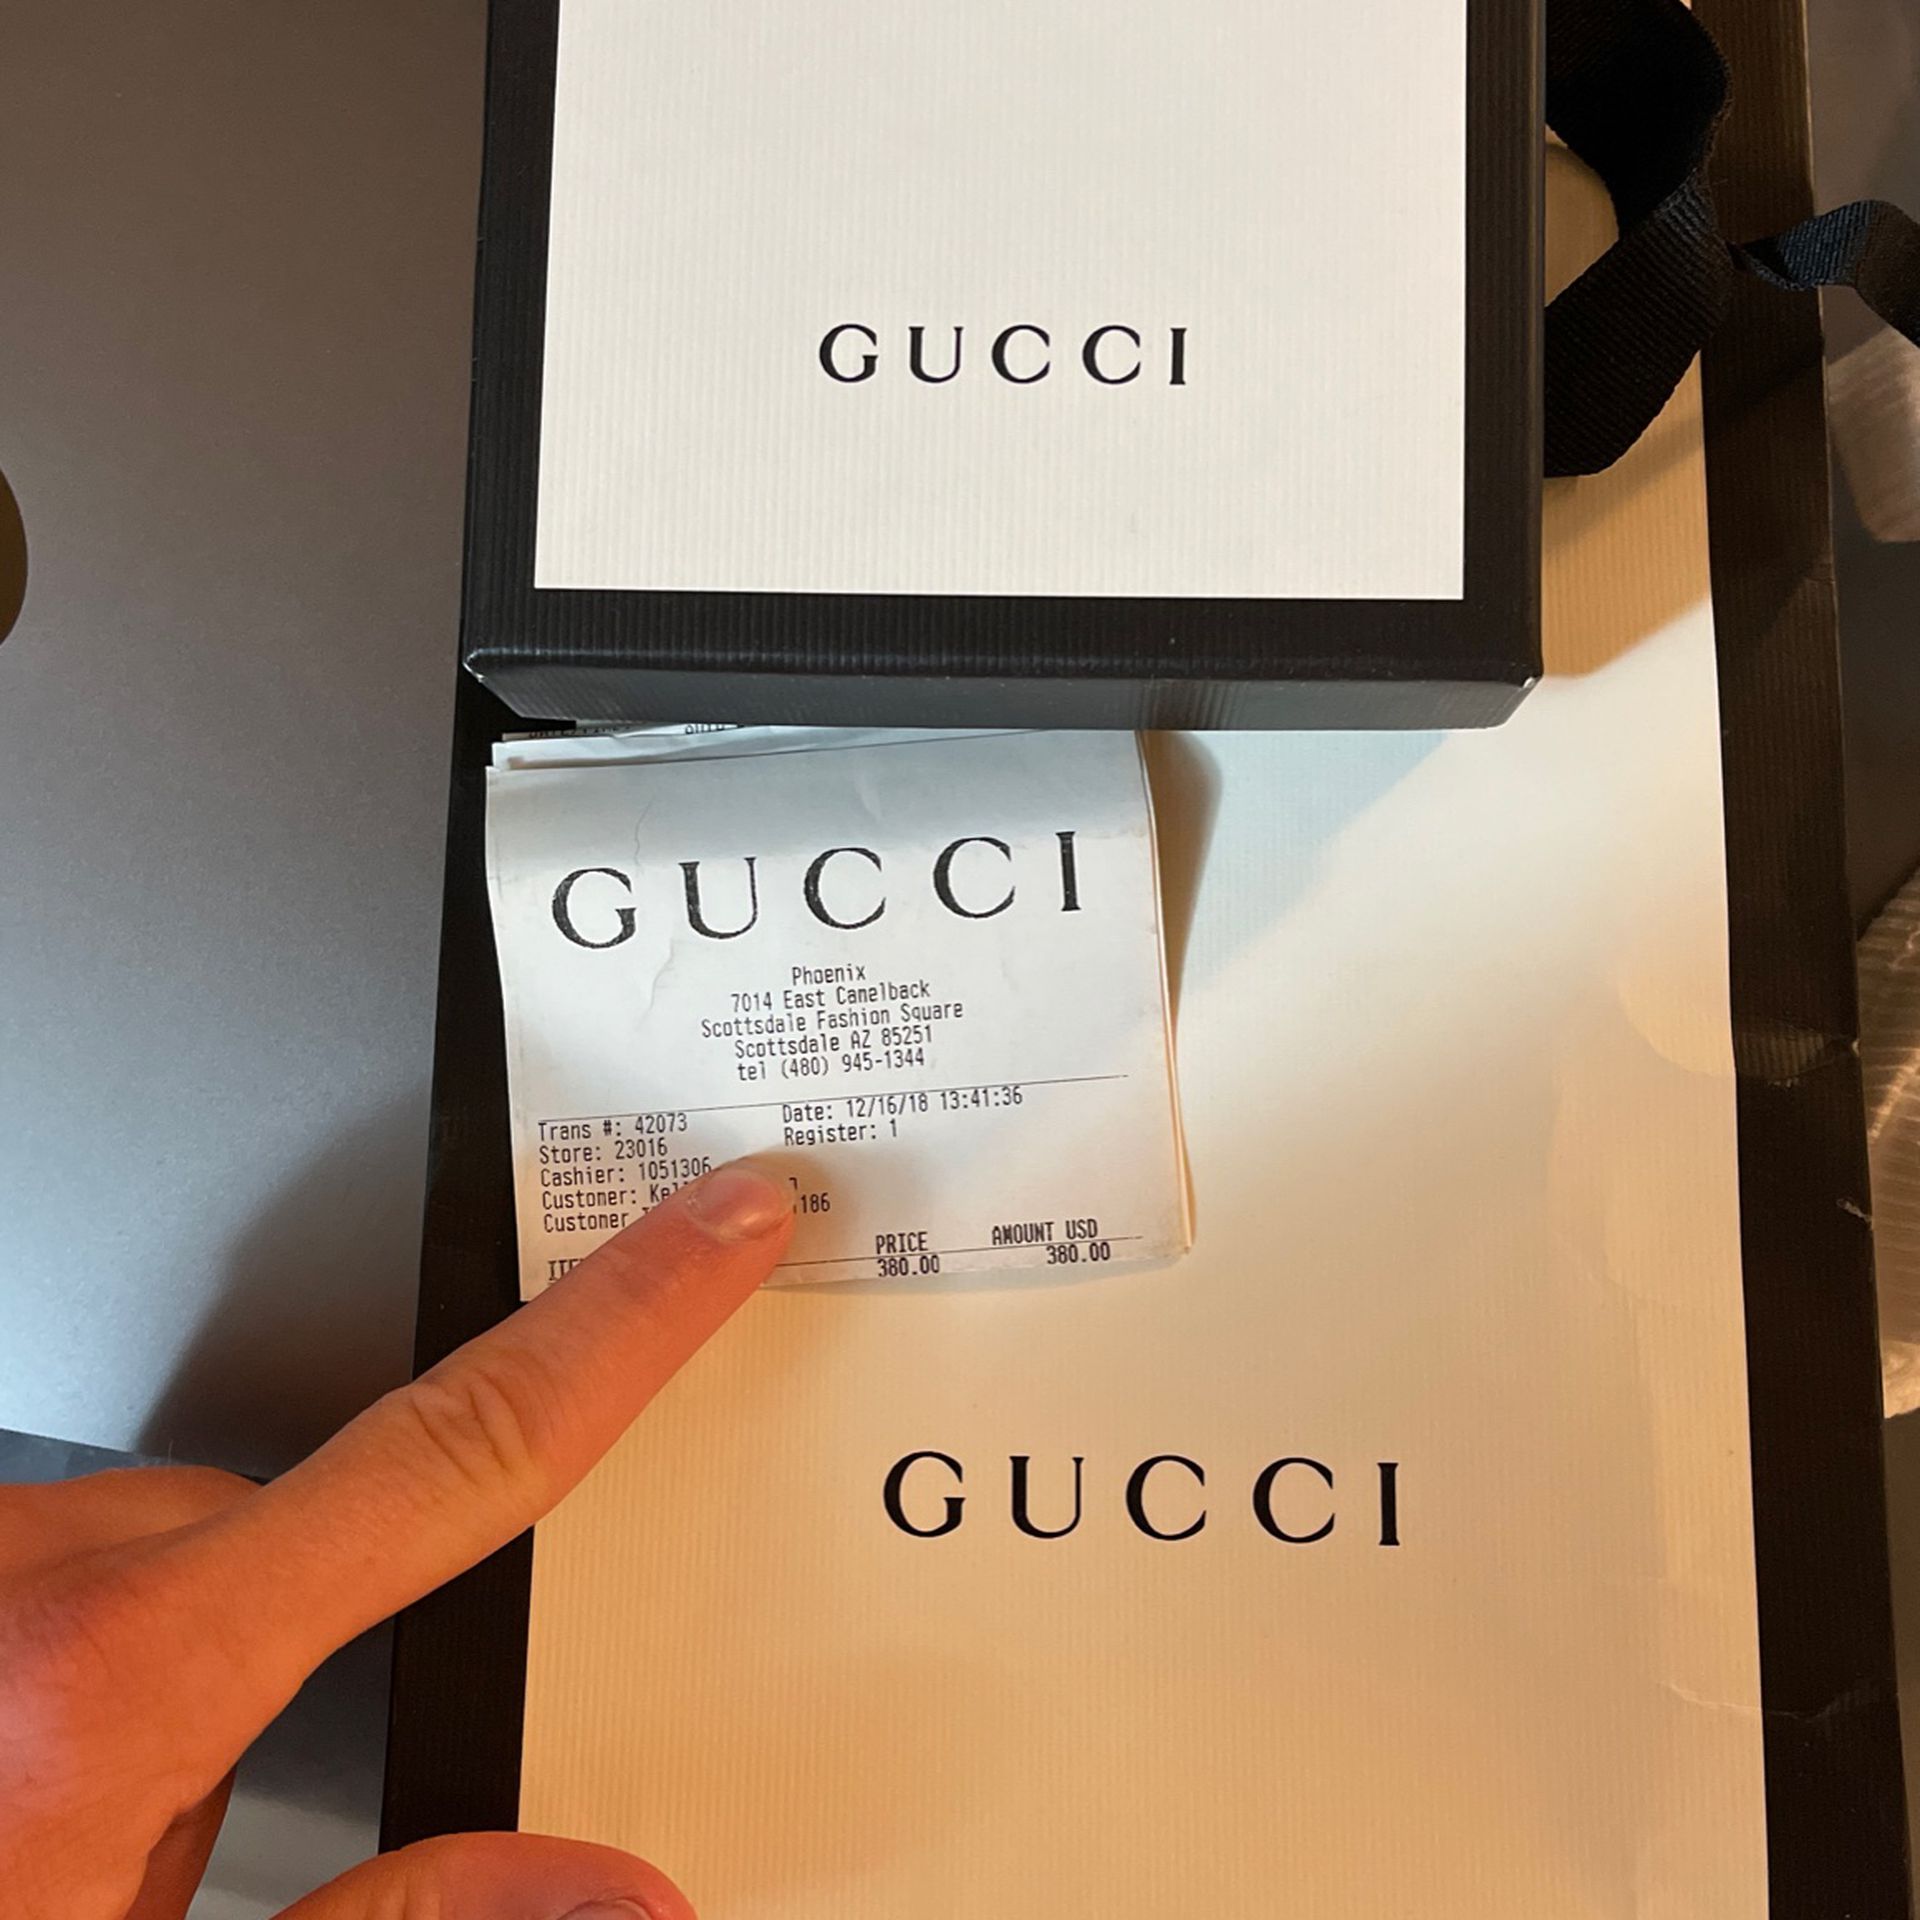 Authentic Gucci Bag, Wallet Case (box&bag Only)